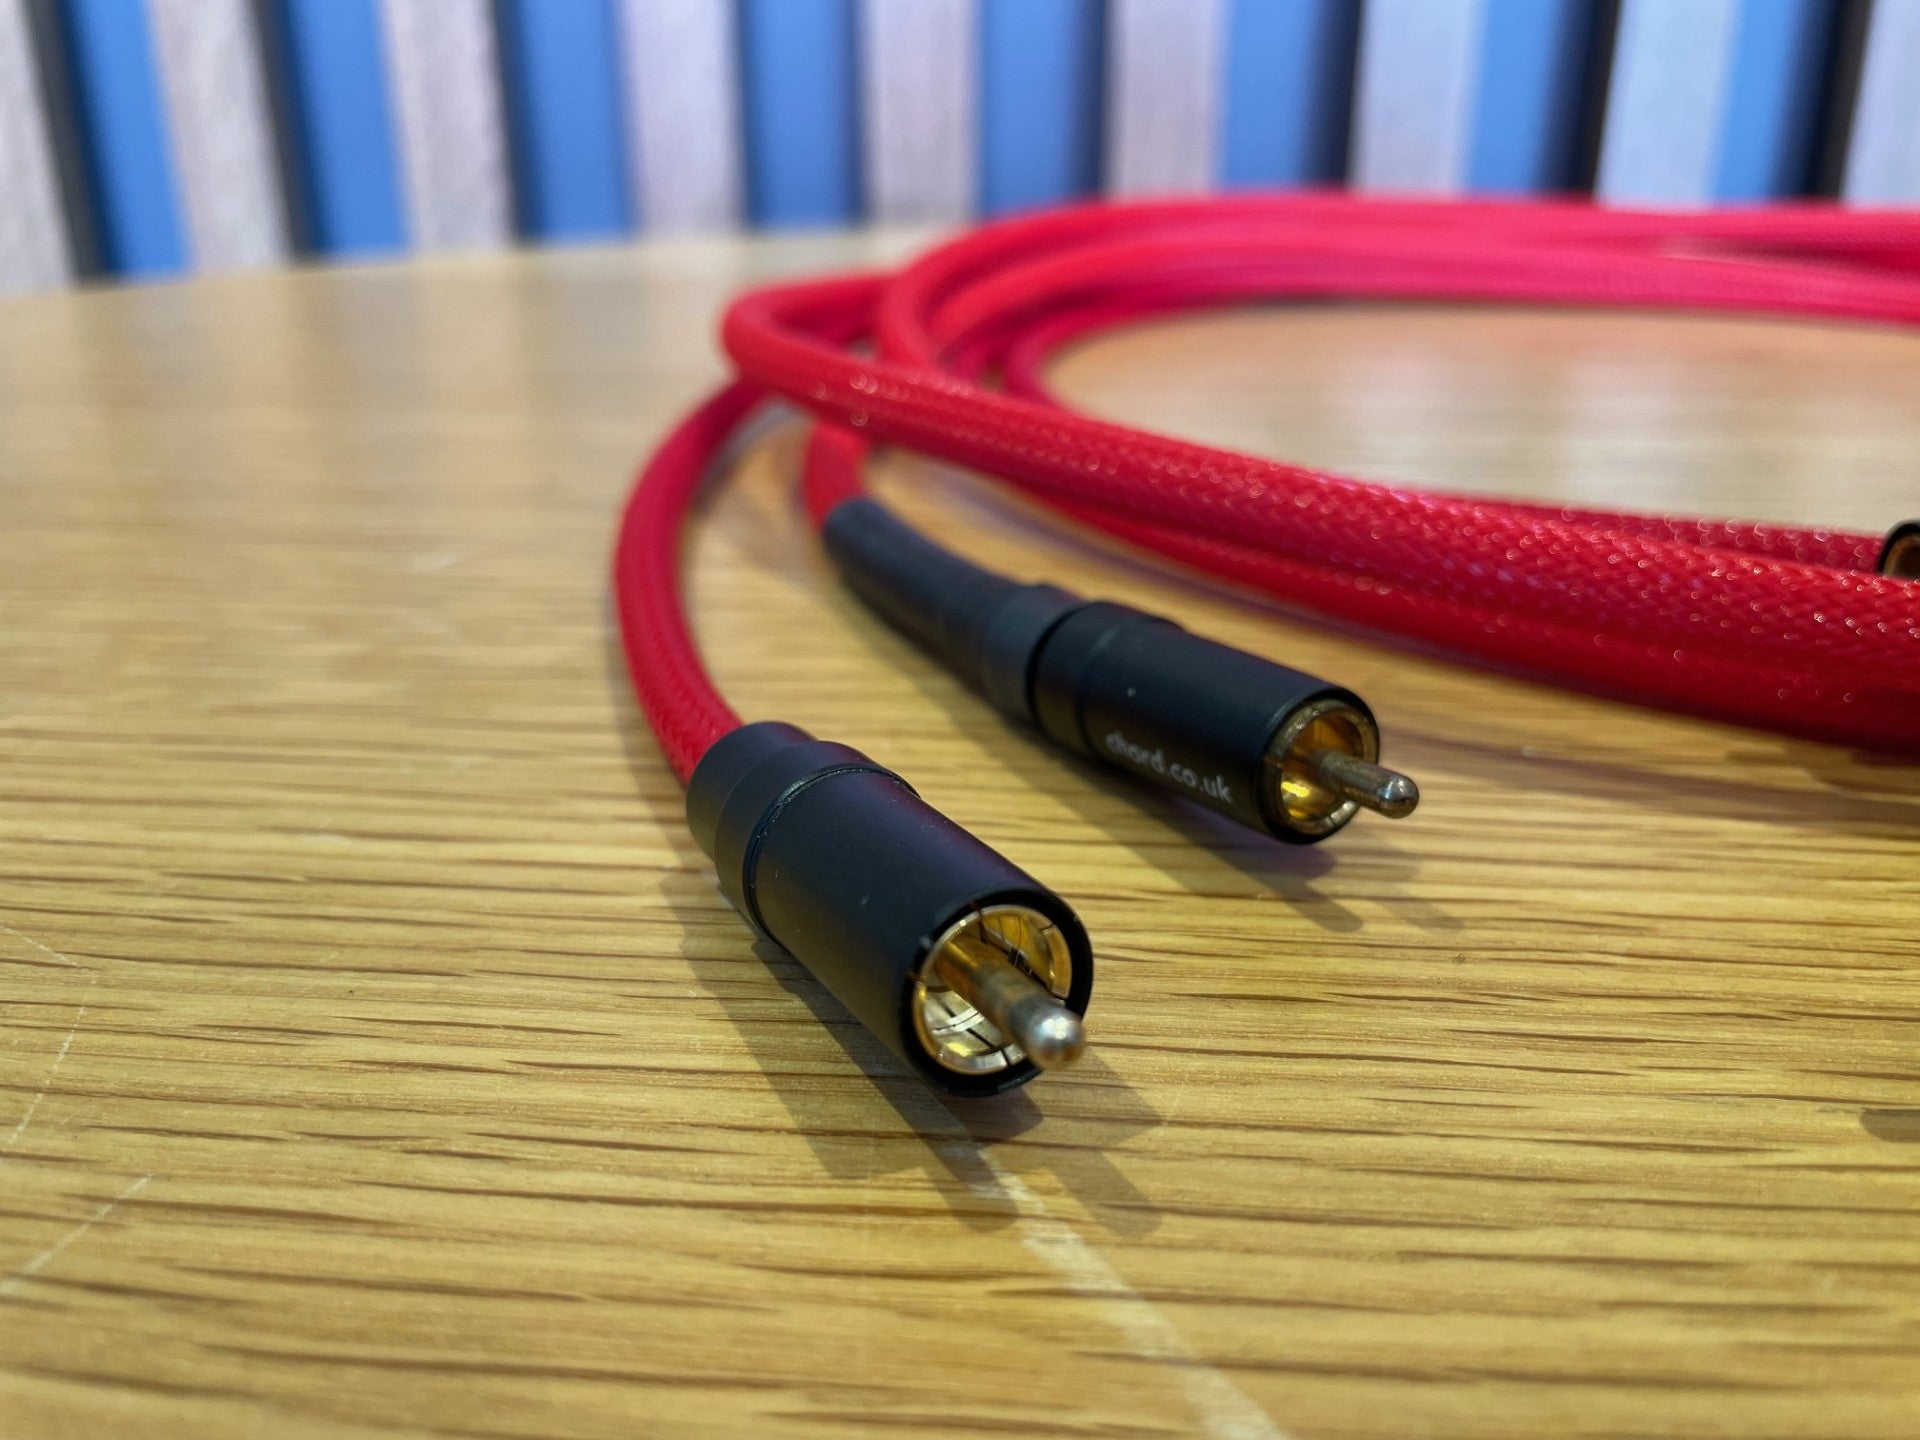 The CHORD Company Shawline RCA Interconnect Cable 3m Pair - Consignment